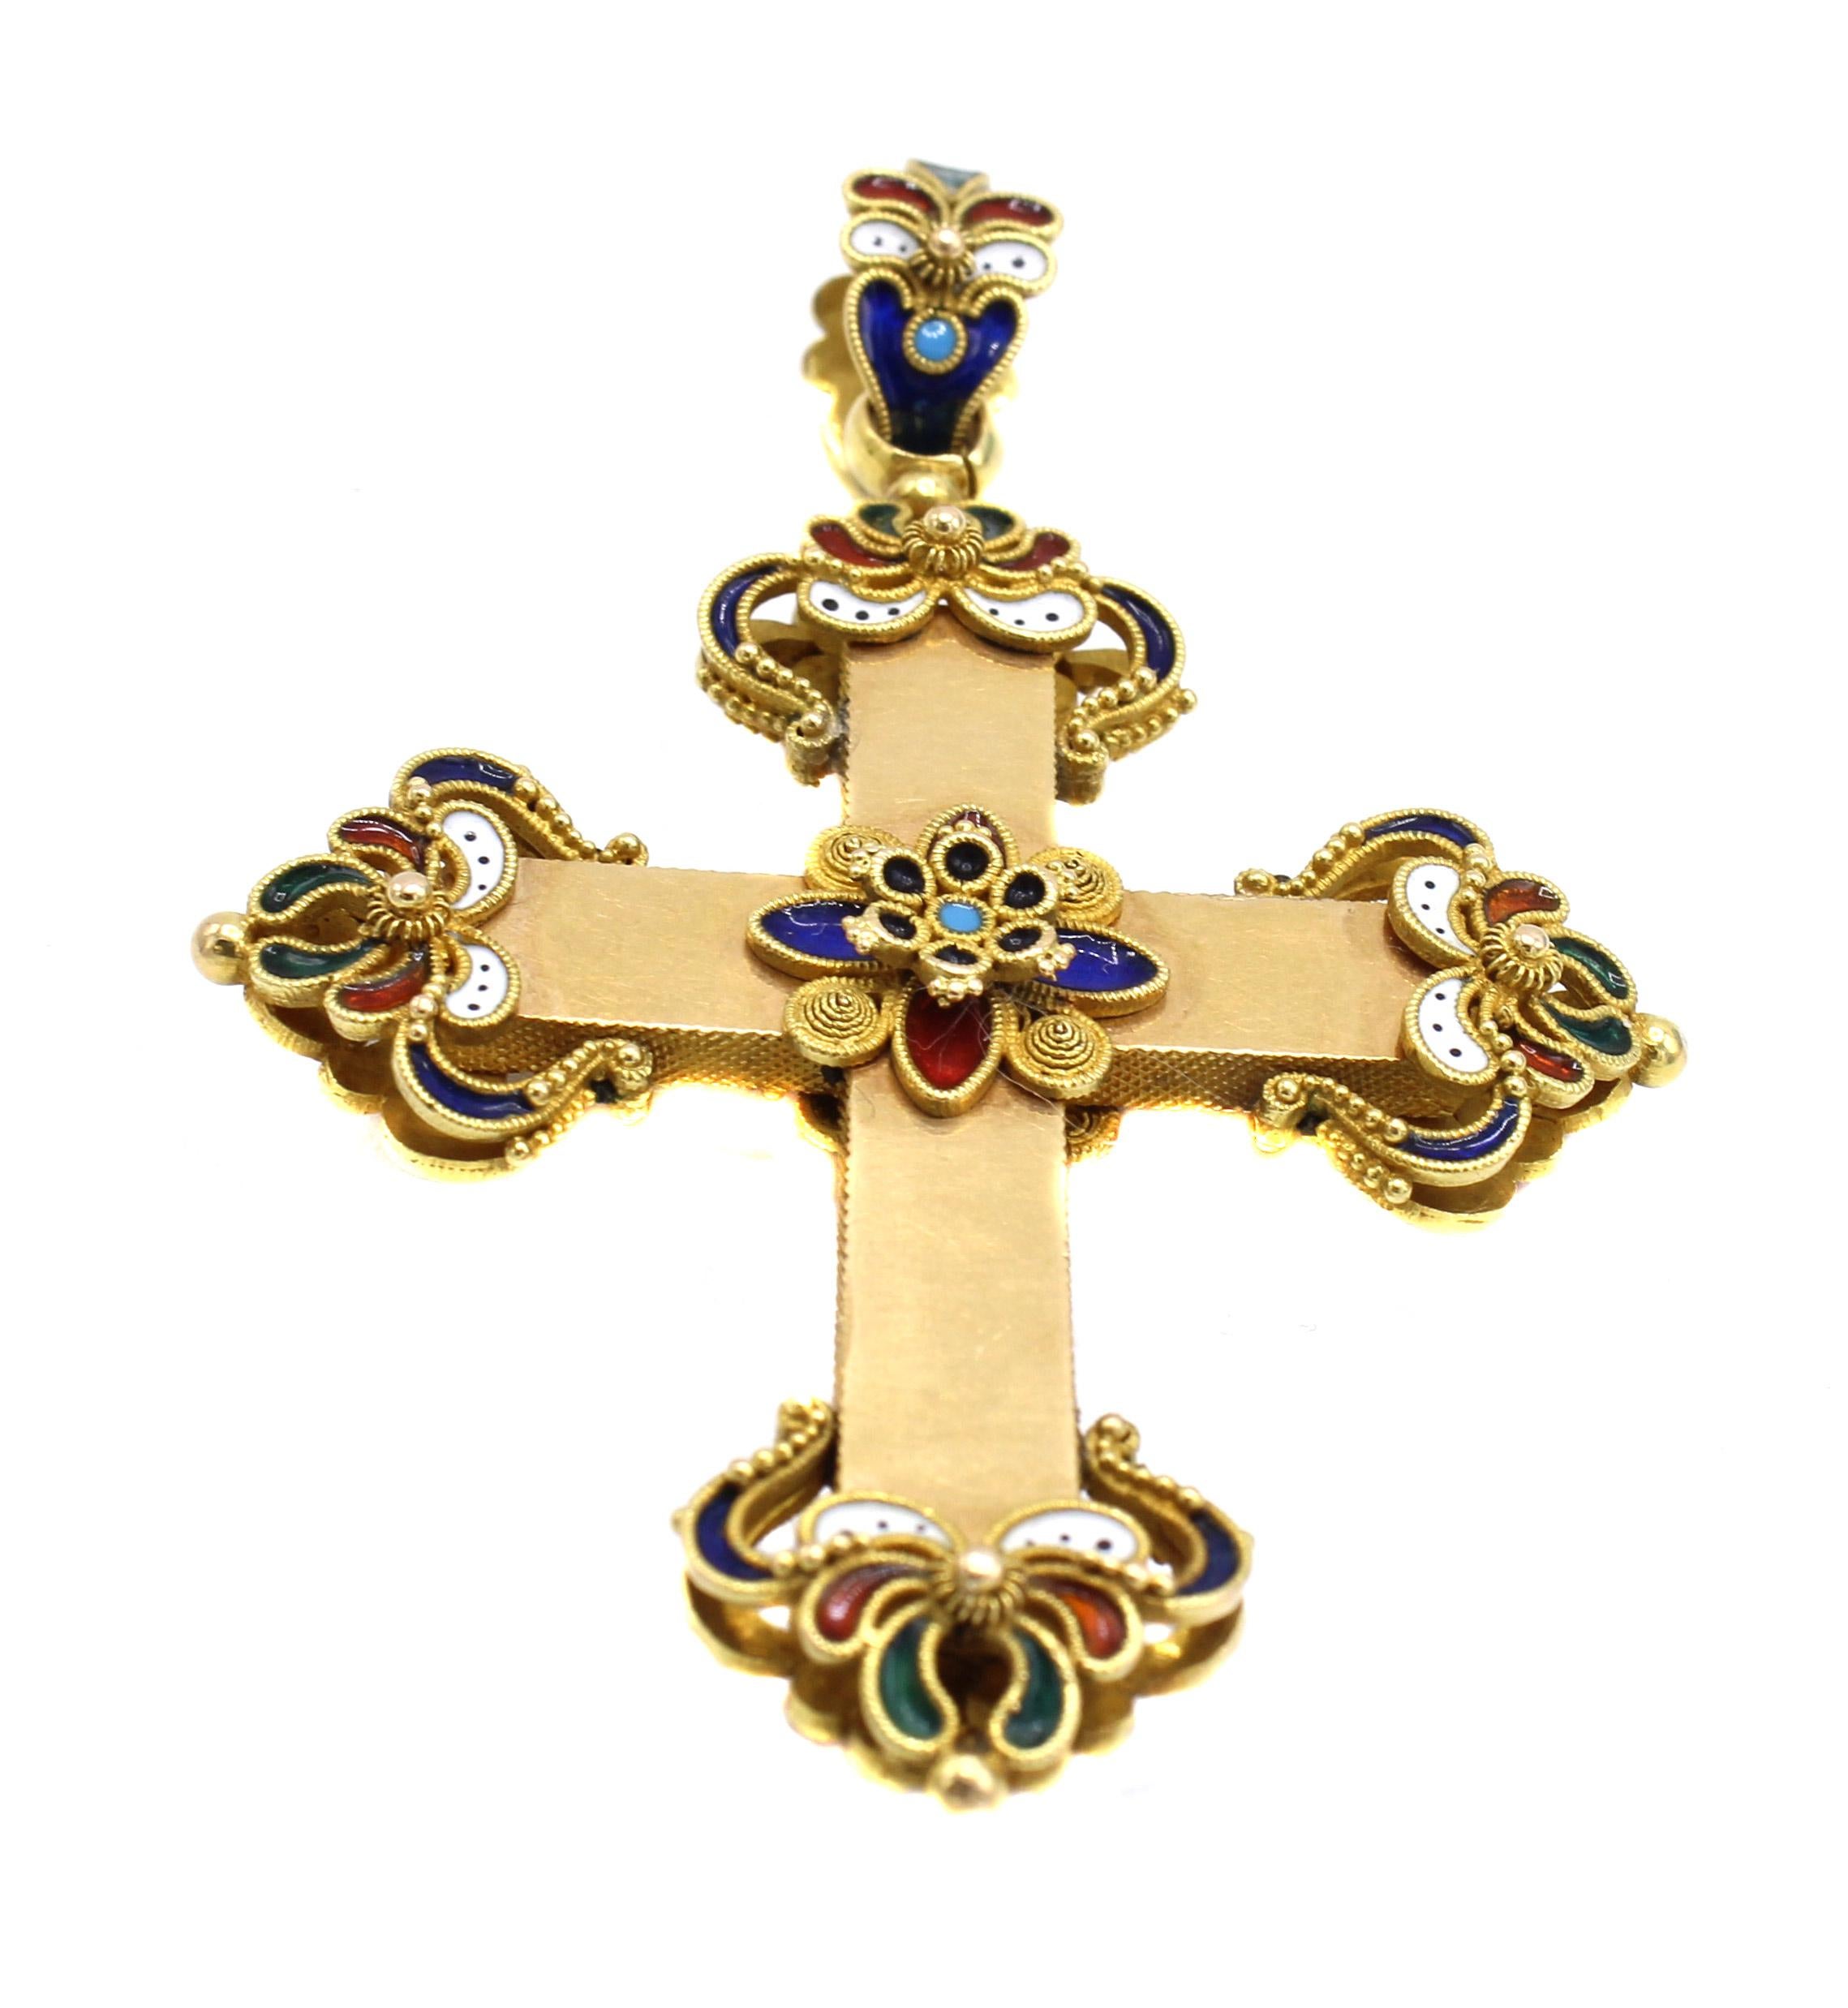 This Etruscan Revival pendant from ca. 1875 in the shape of a cross is truly a piece of art. Jewelers of this period like Giuliano and Castellani were infatuated by the Neo-Renaissance and there work was known for detail and the finest